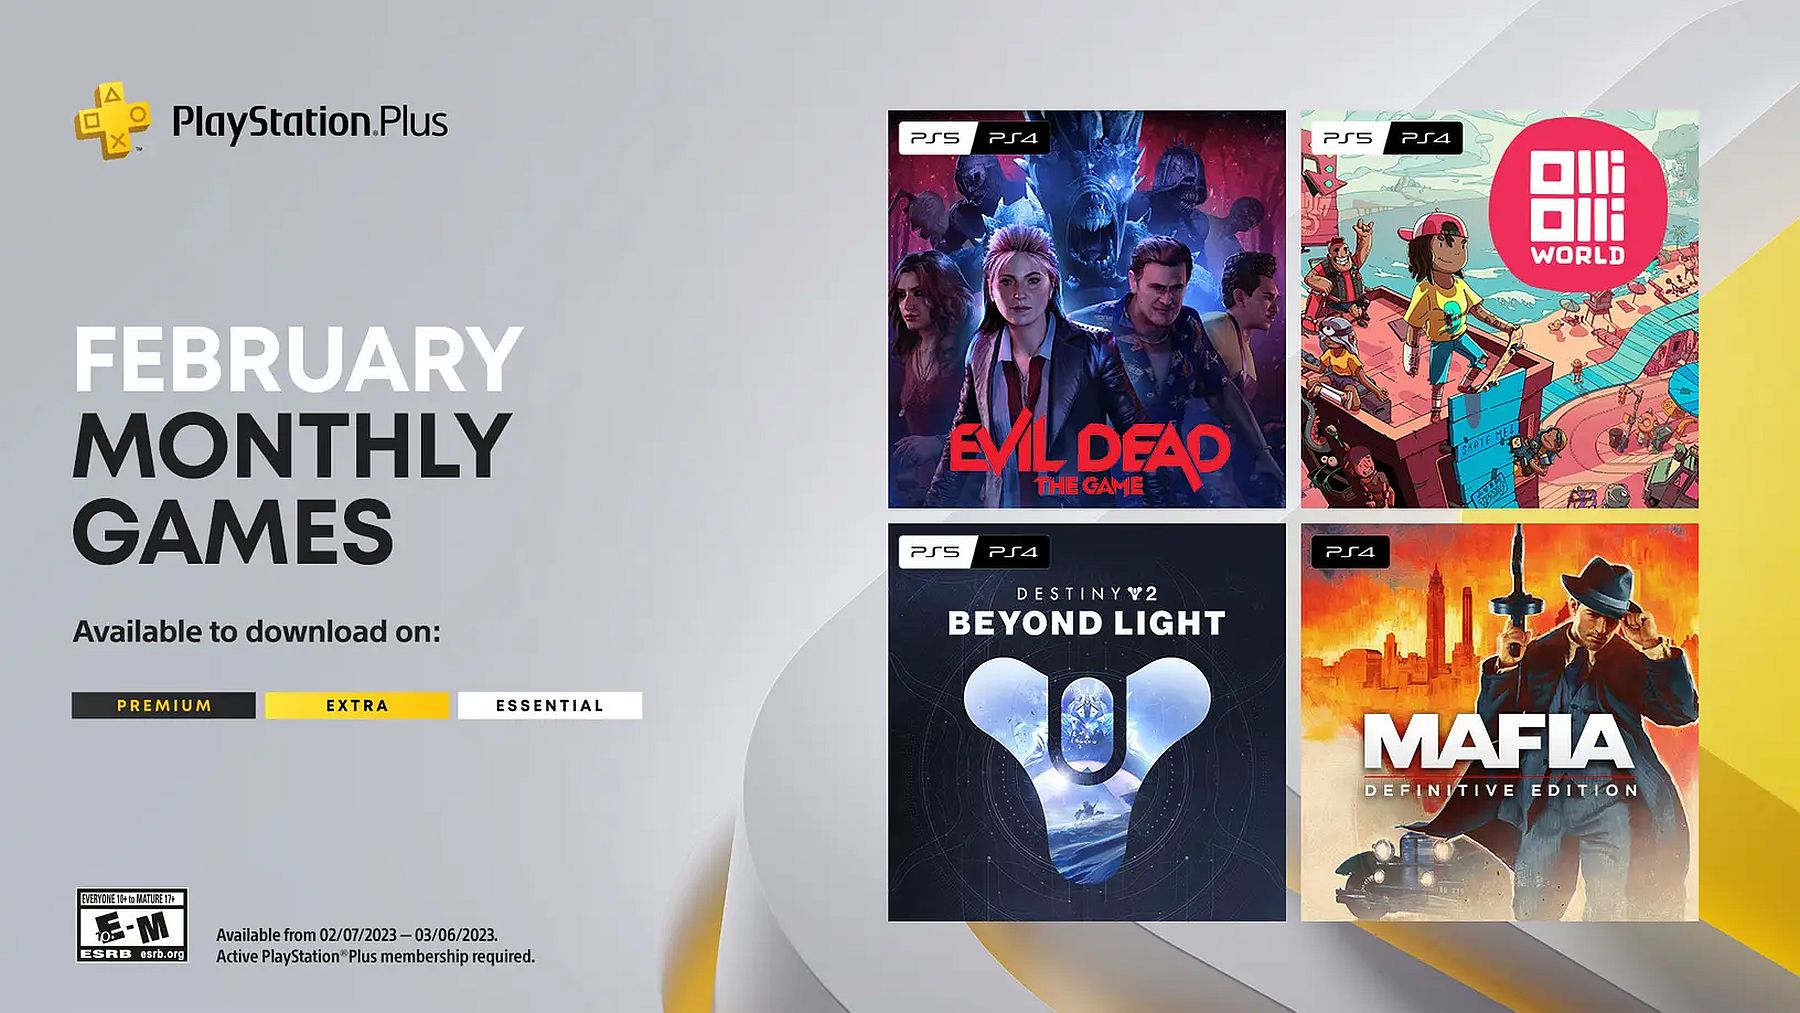 February PlayStation Plus games consist of Evil Dead: The Game, OlliOlliWorld, Destiny 2: Beyond Light, more